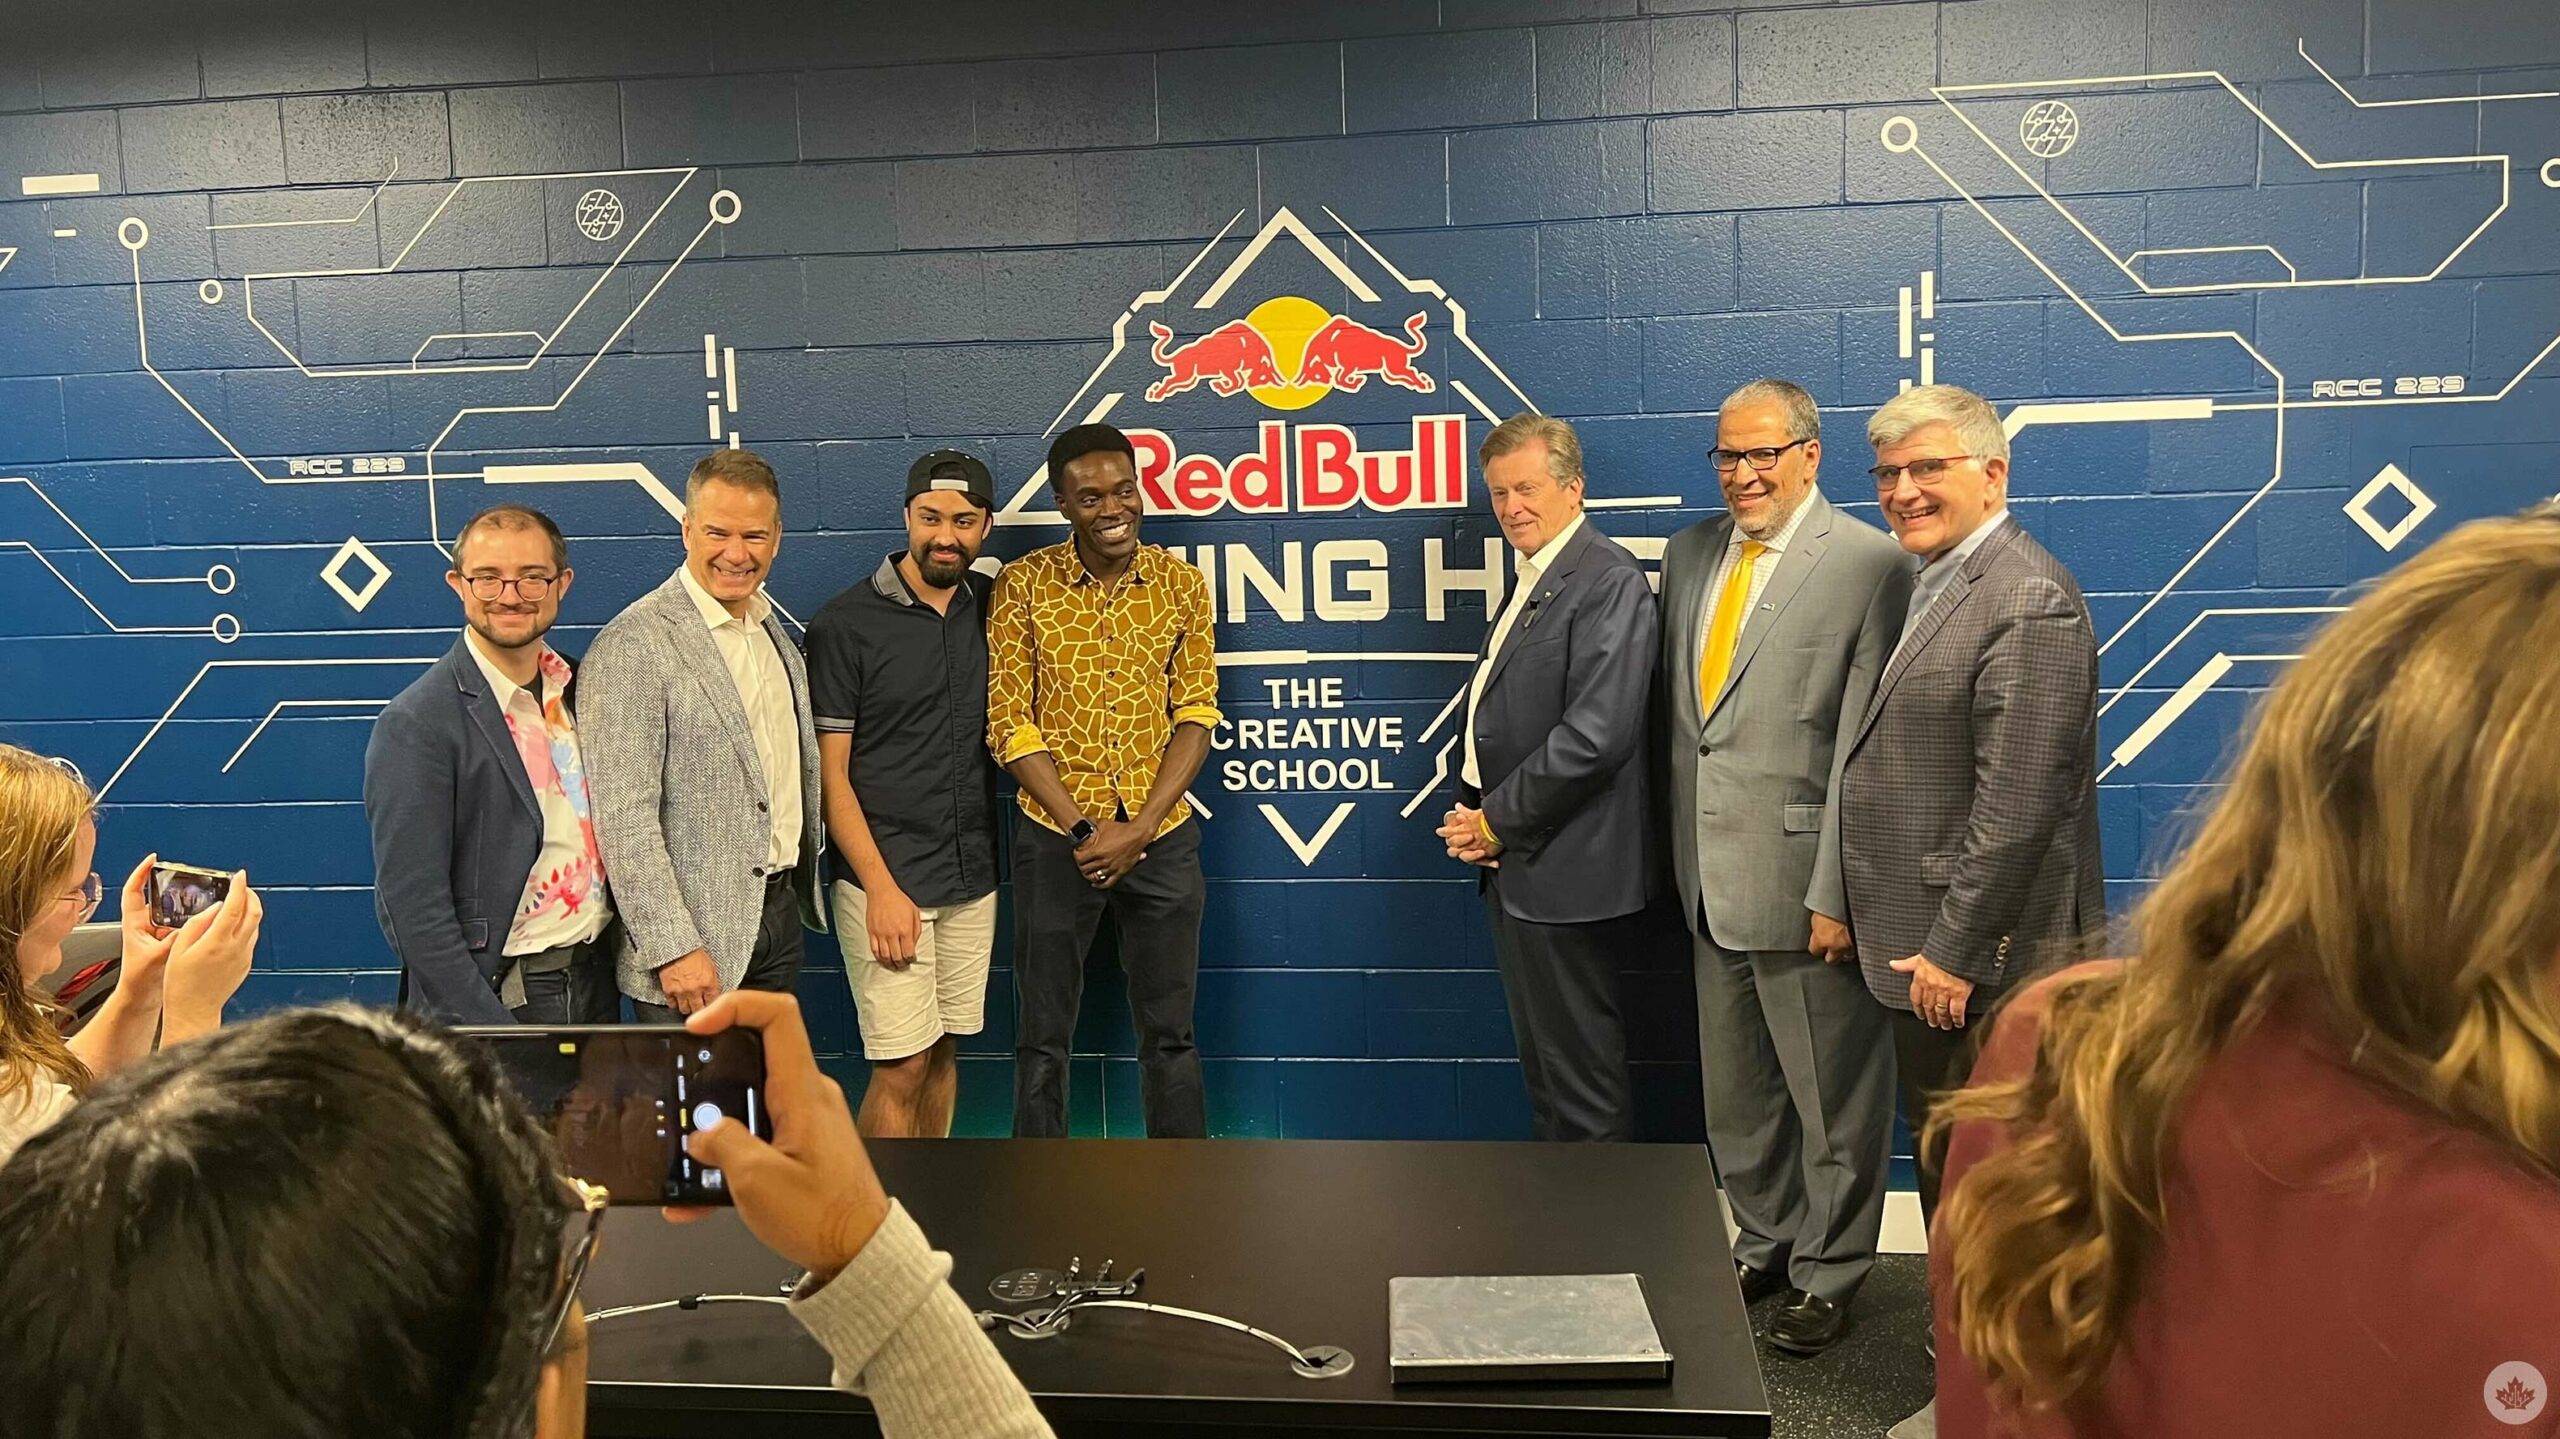 Toronto Metropolitan University Red Bull Gaming Hub launch with Toronto Mayor John Tory and other guests